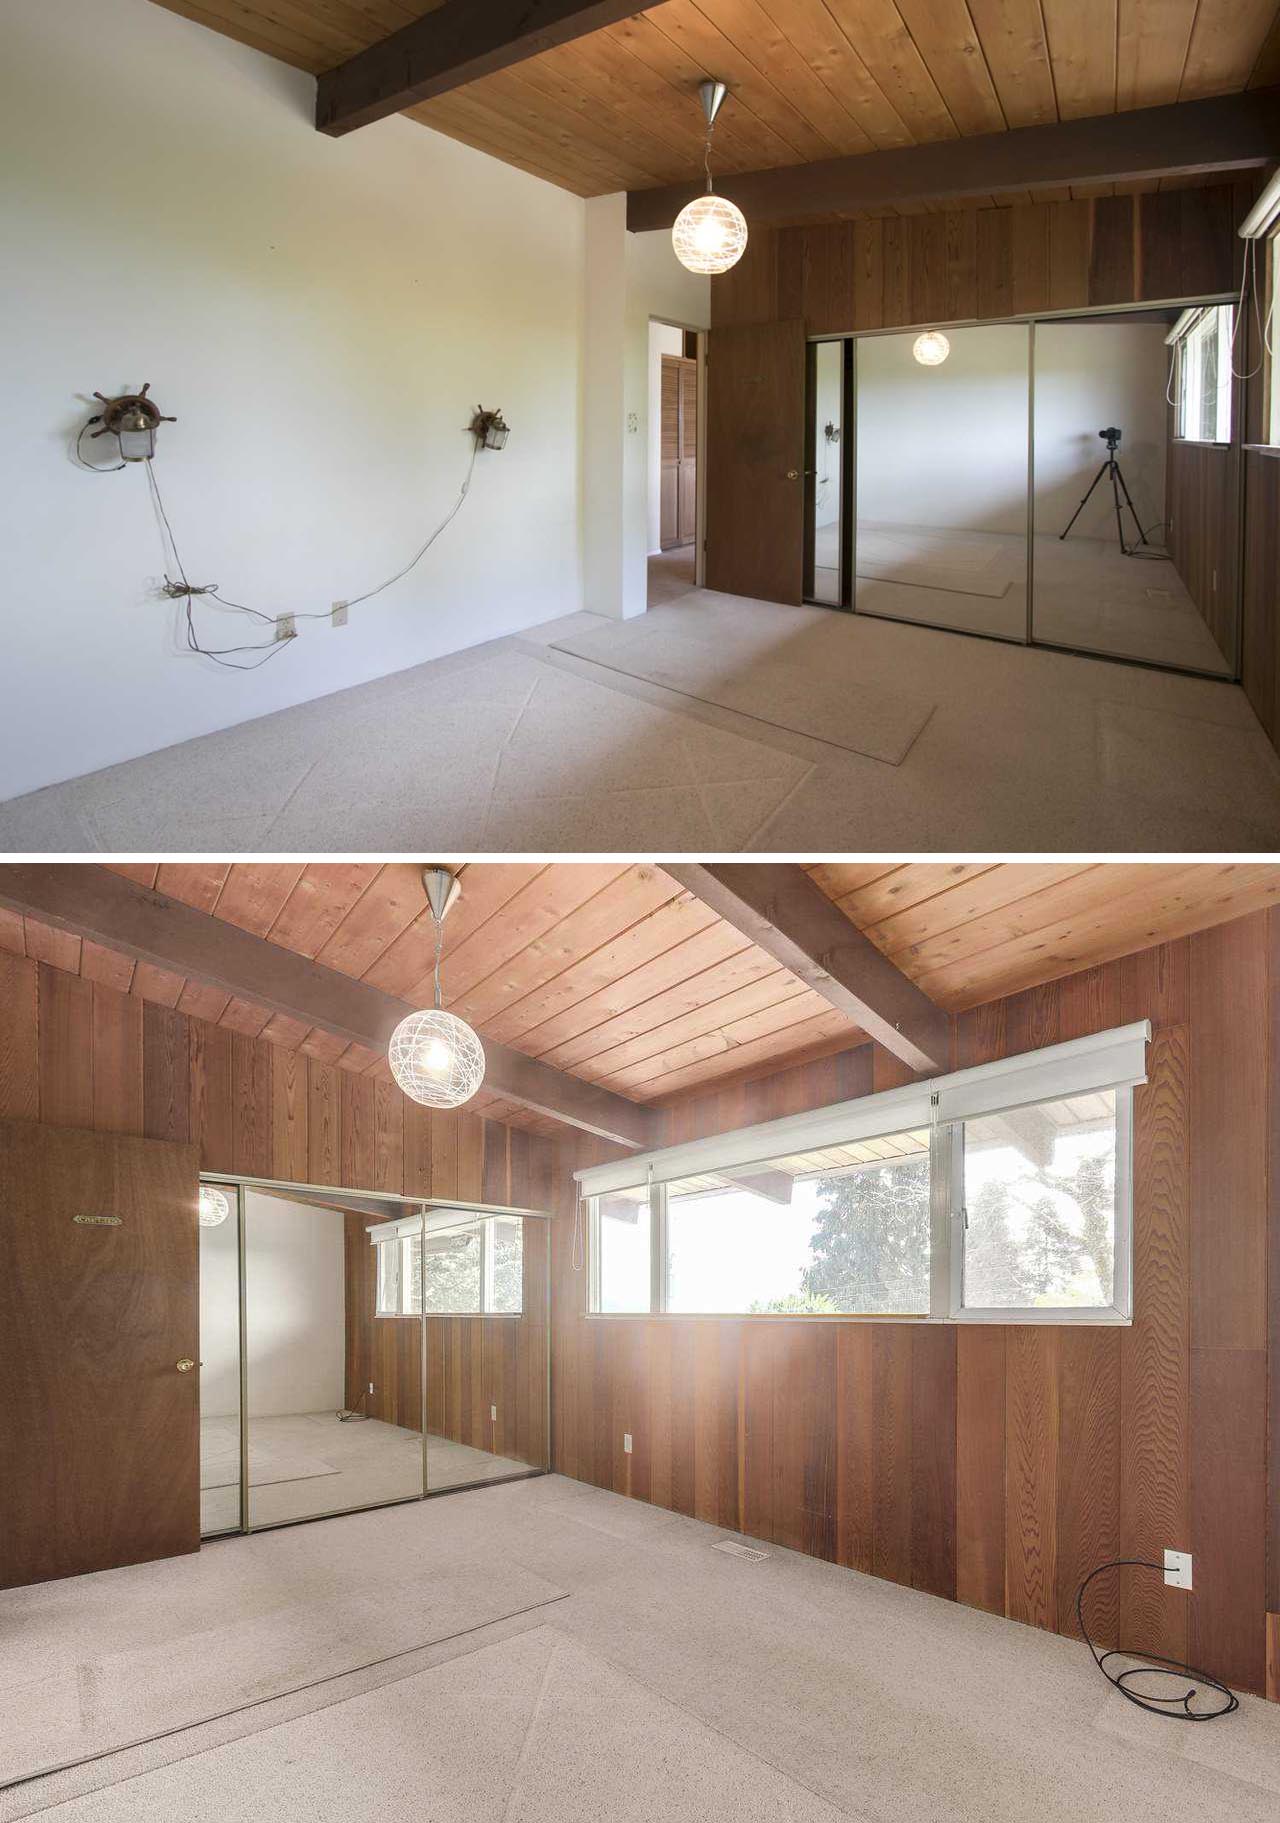 BEFORE - A mid-century modern bedroom with wood paneled walls.